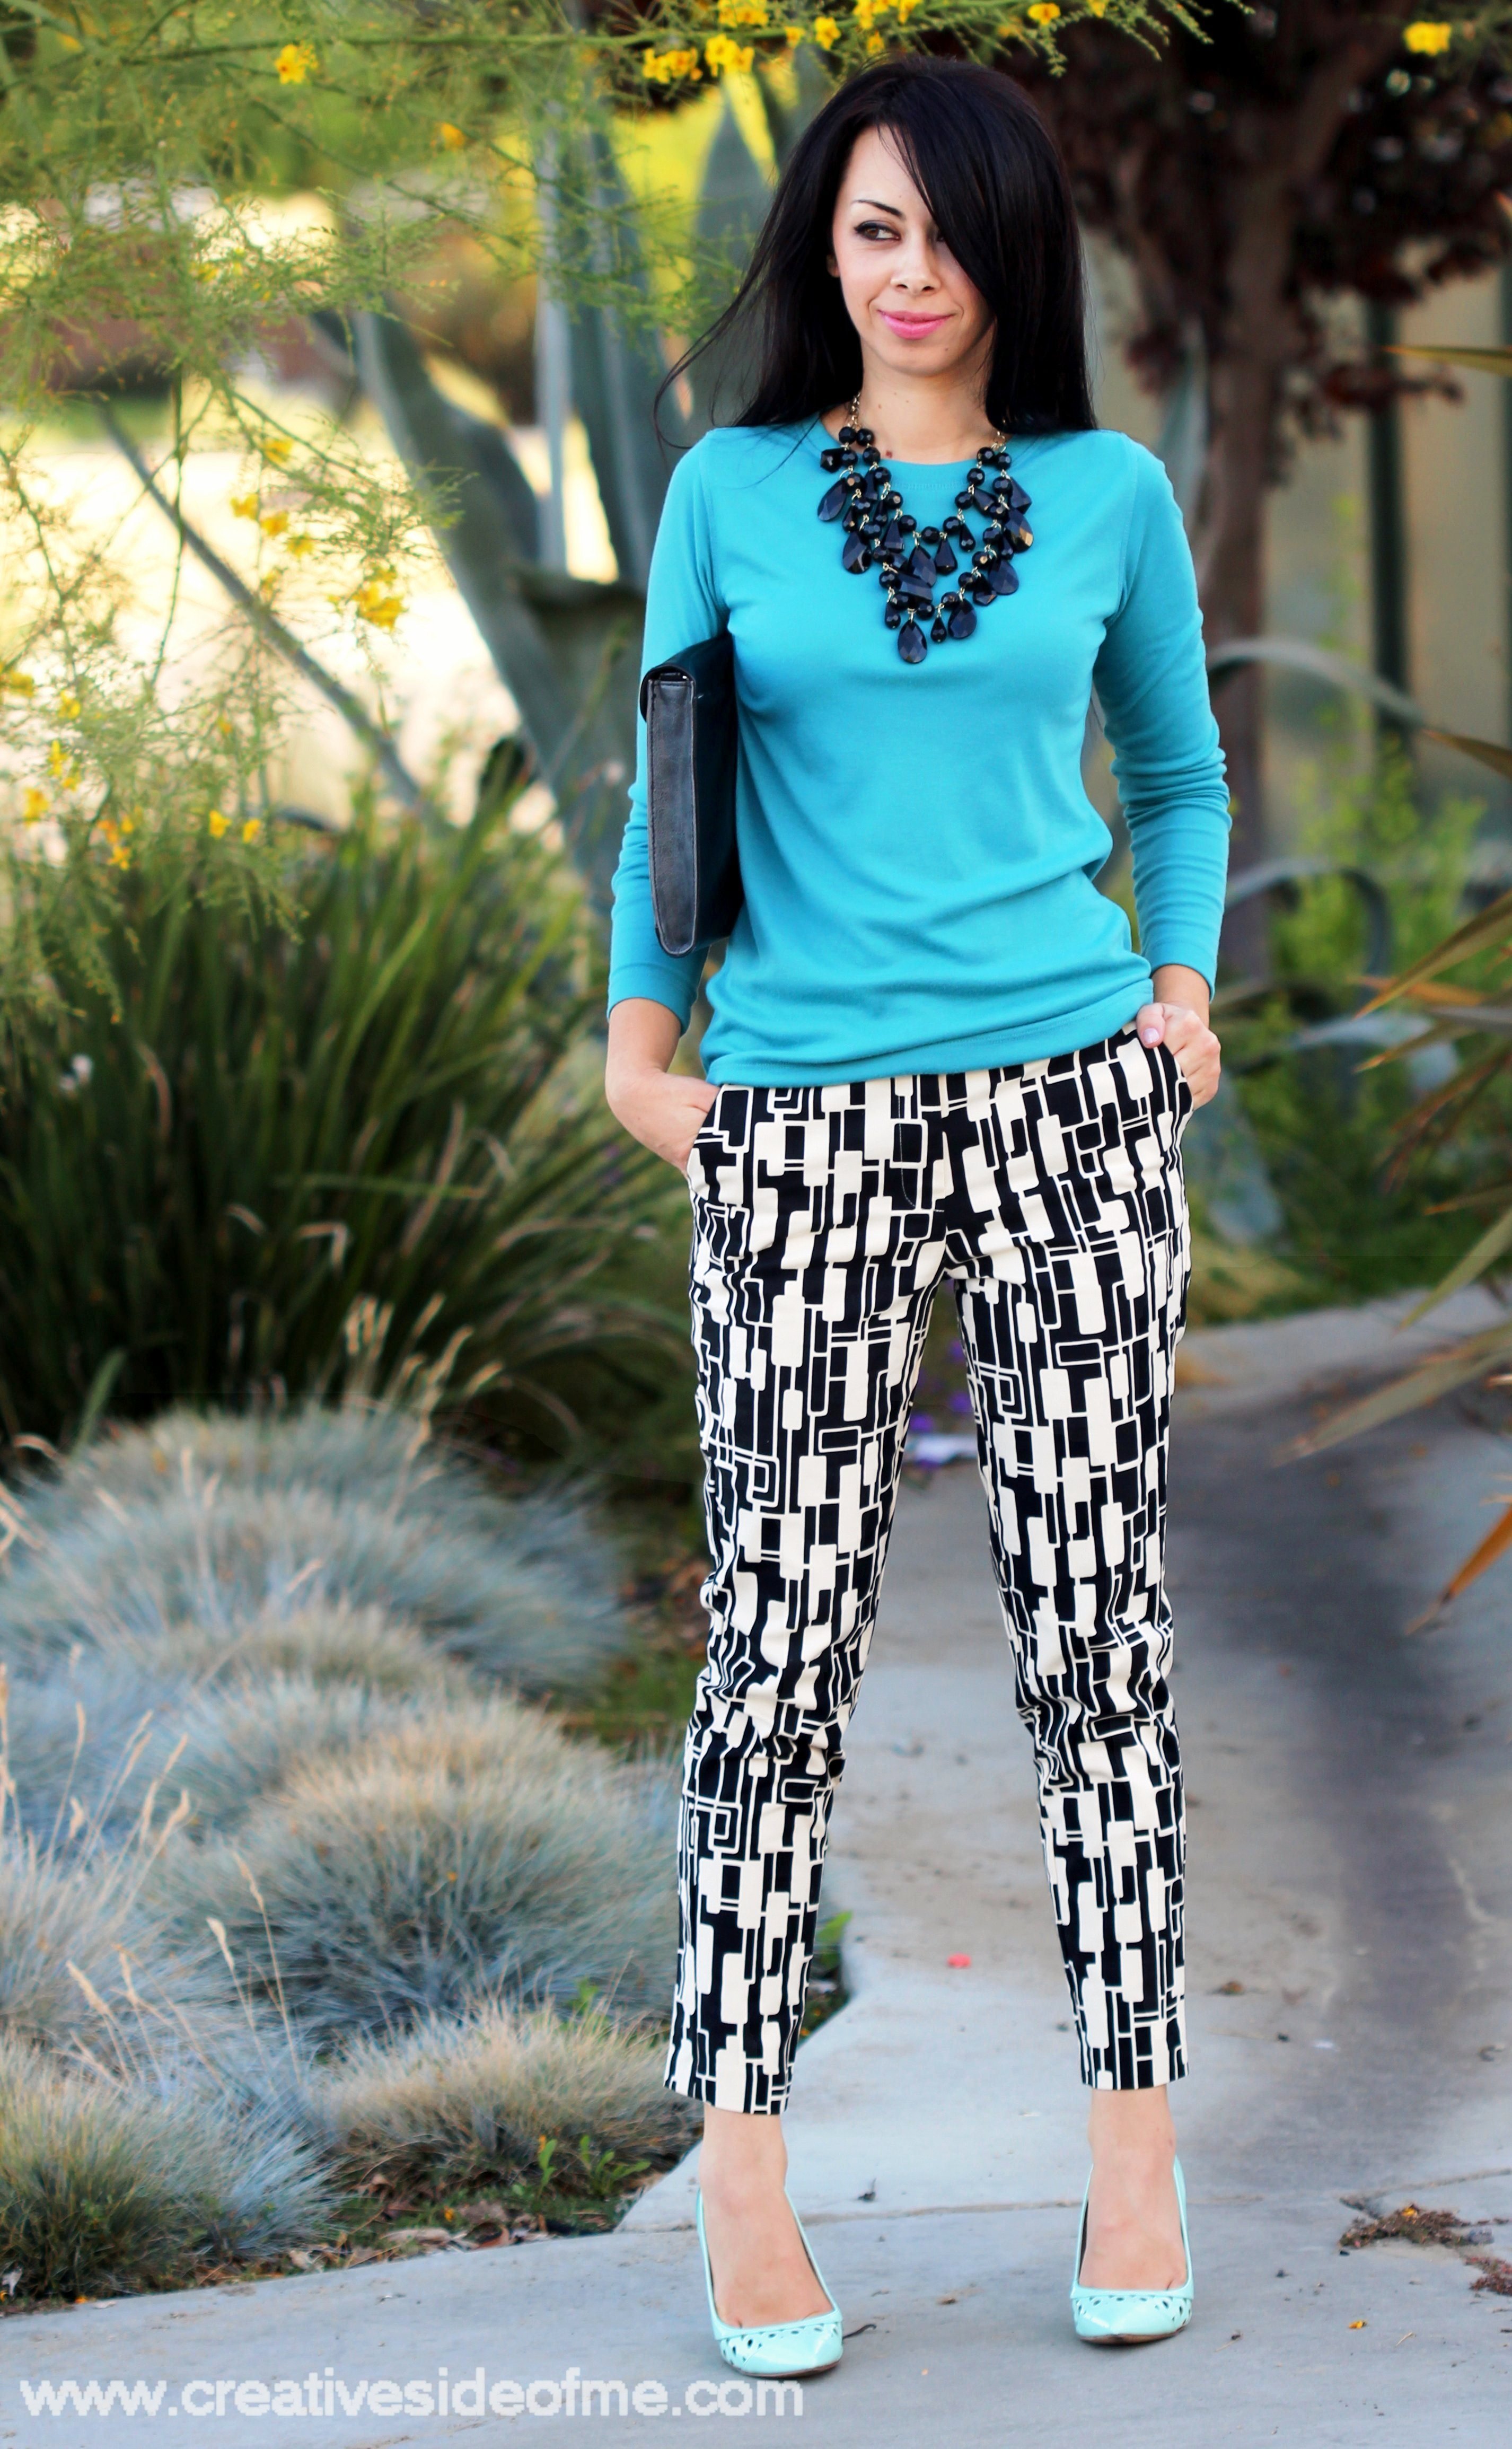 8-Printed Pant Outfit